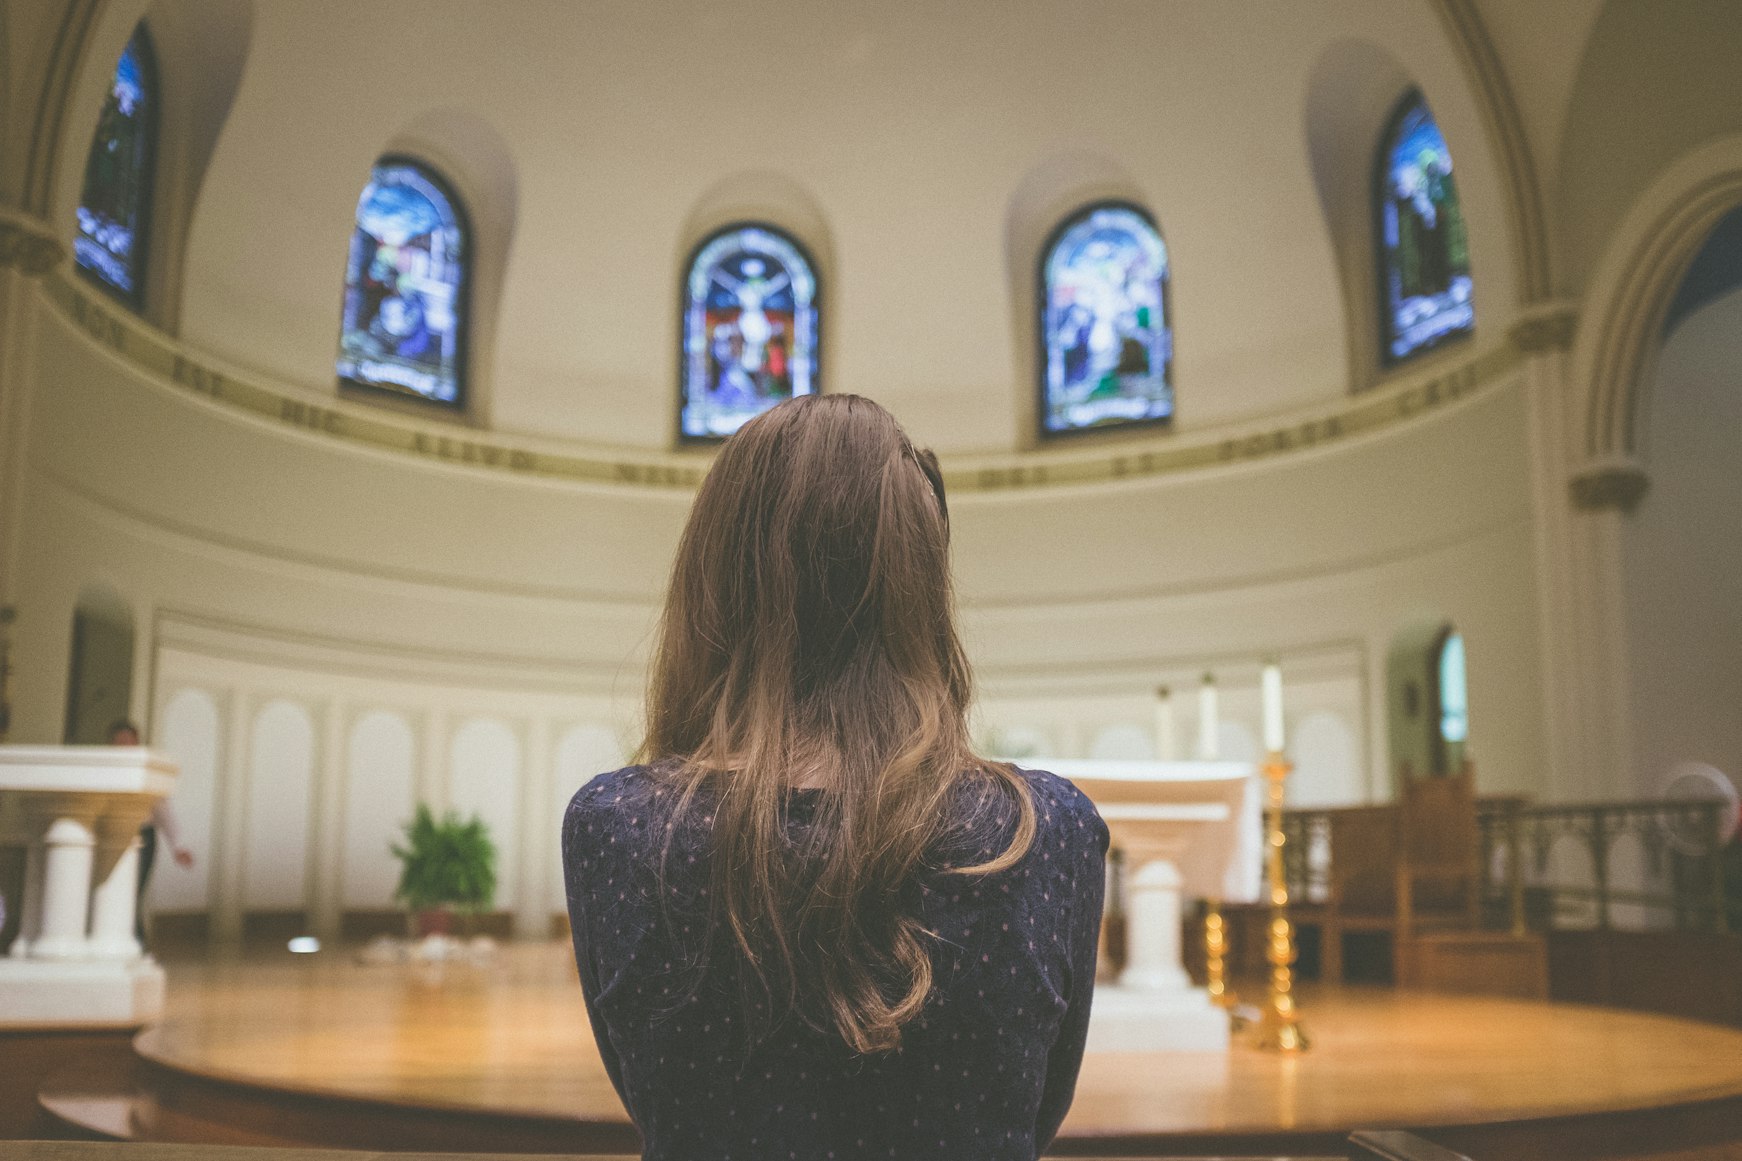 <div><div class="caption">
                  Interested in becoming Catholic?
                  </div><div className="subcaption">
                  <a href="mailto:info@olphkc.org">Contact the parish office</a> about our RCIA program for adults 16+. Classes begin Mondays this fall.
                </div></div>